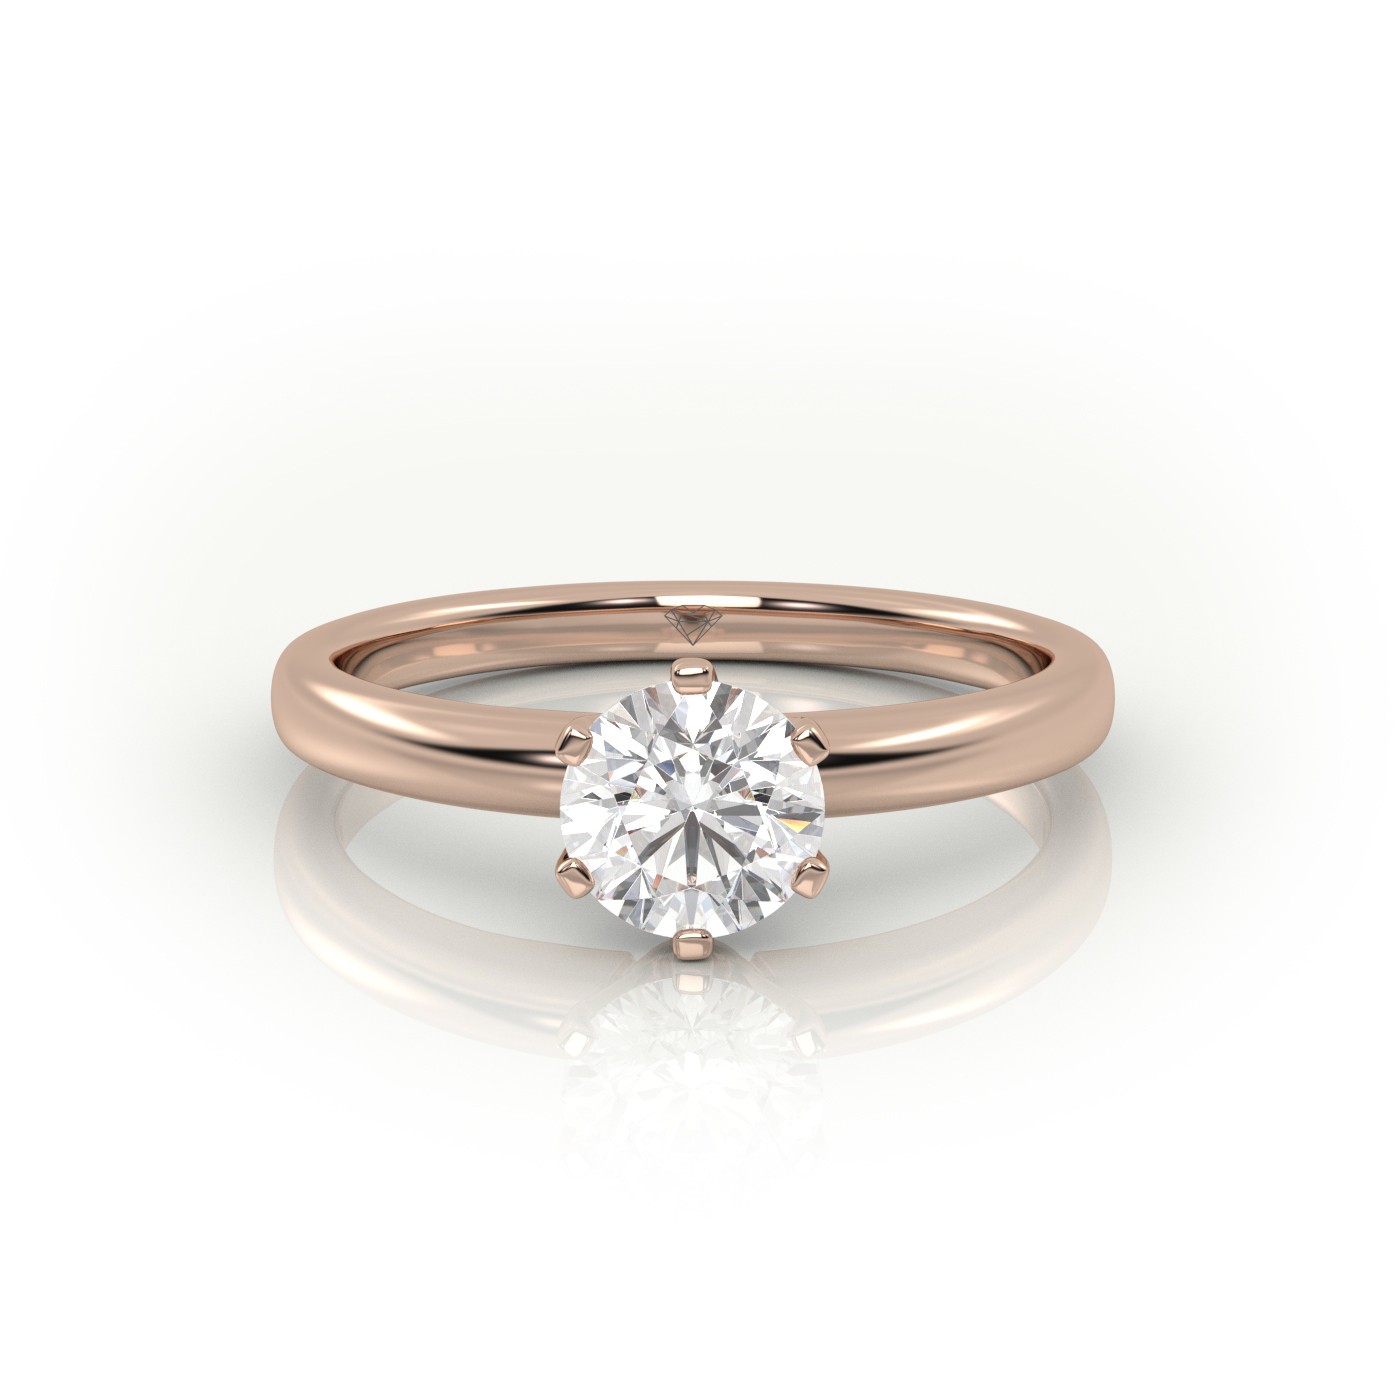 18K ROSE GOLD ROUND CUT 6 PRONGS SOLITAIRE ENGAGEMENT RING